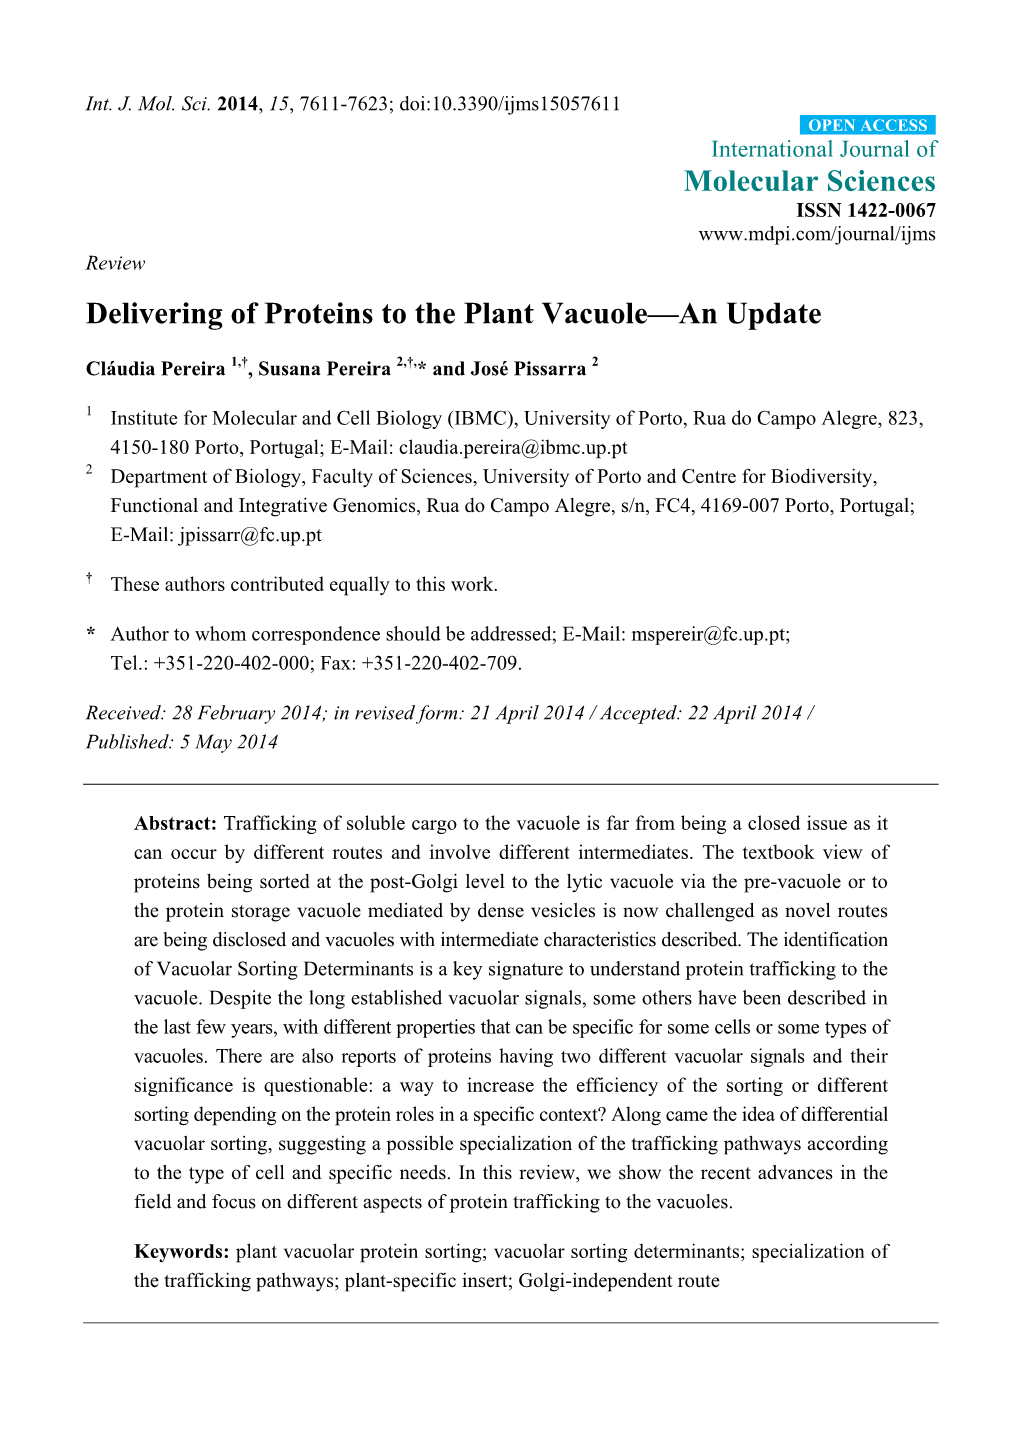 Delivering of Proteins to the Plant Vacuole—An Update